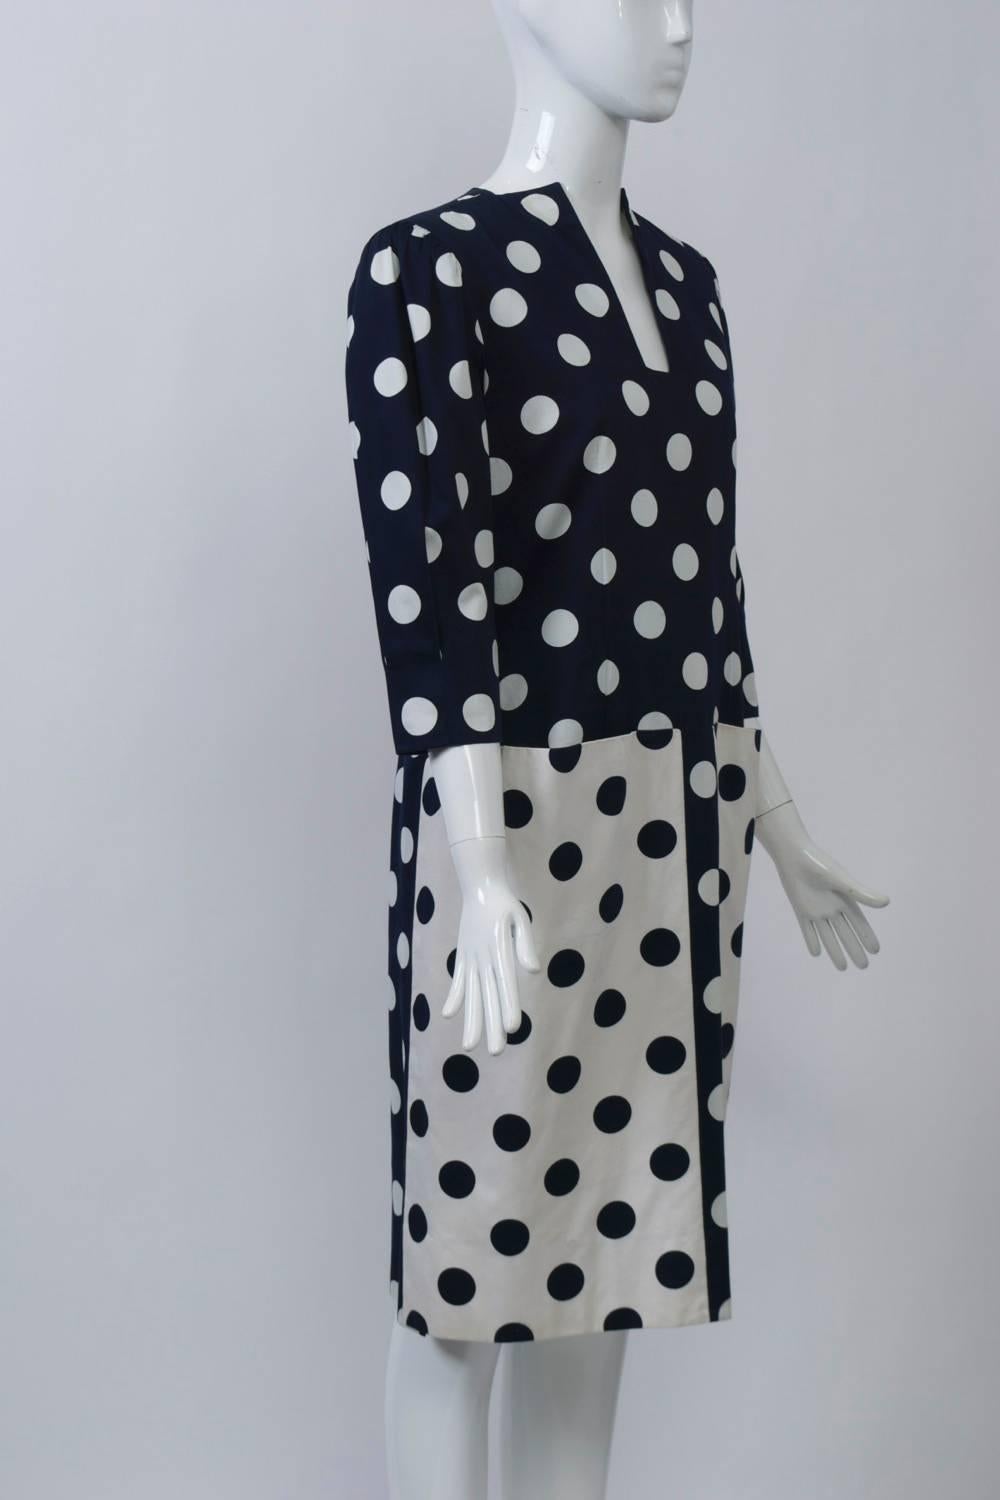 Pauline Trigére 1980s dress in polished cotton printed with navy/white reverse polka dots and featuring the designer's signature attention to detail. The body of the dress, in navy ground with white dots, features an unusual slit neckline and